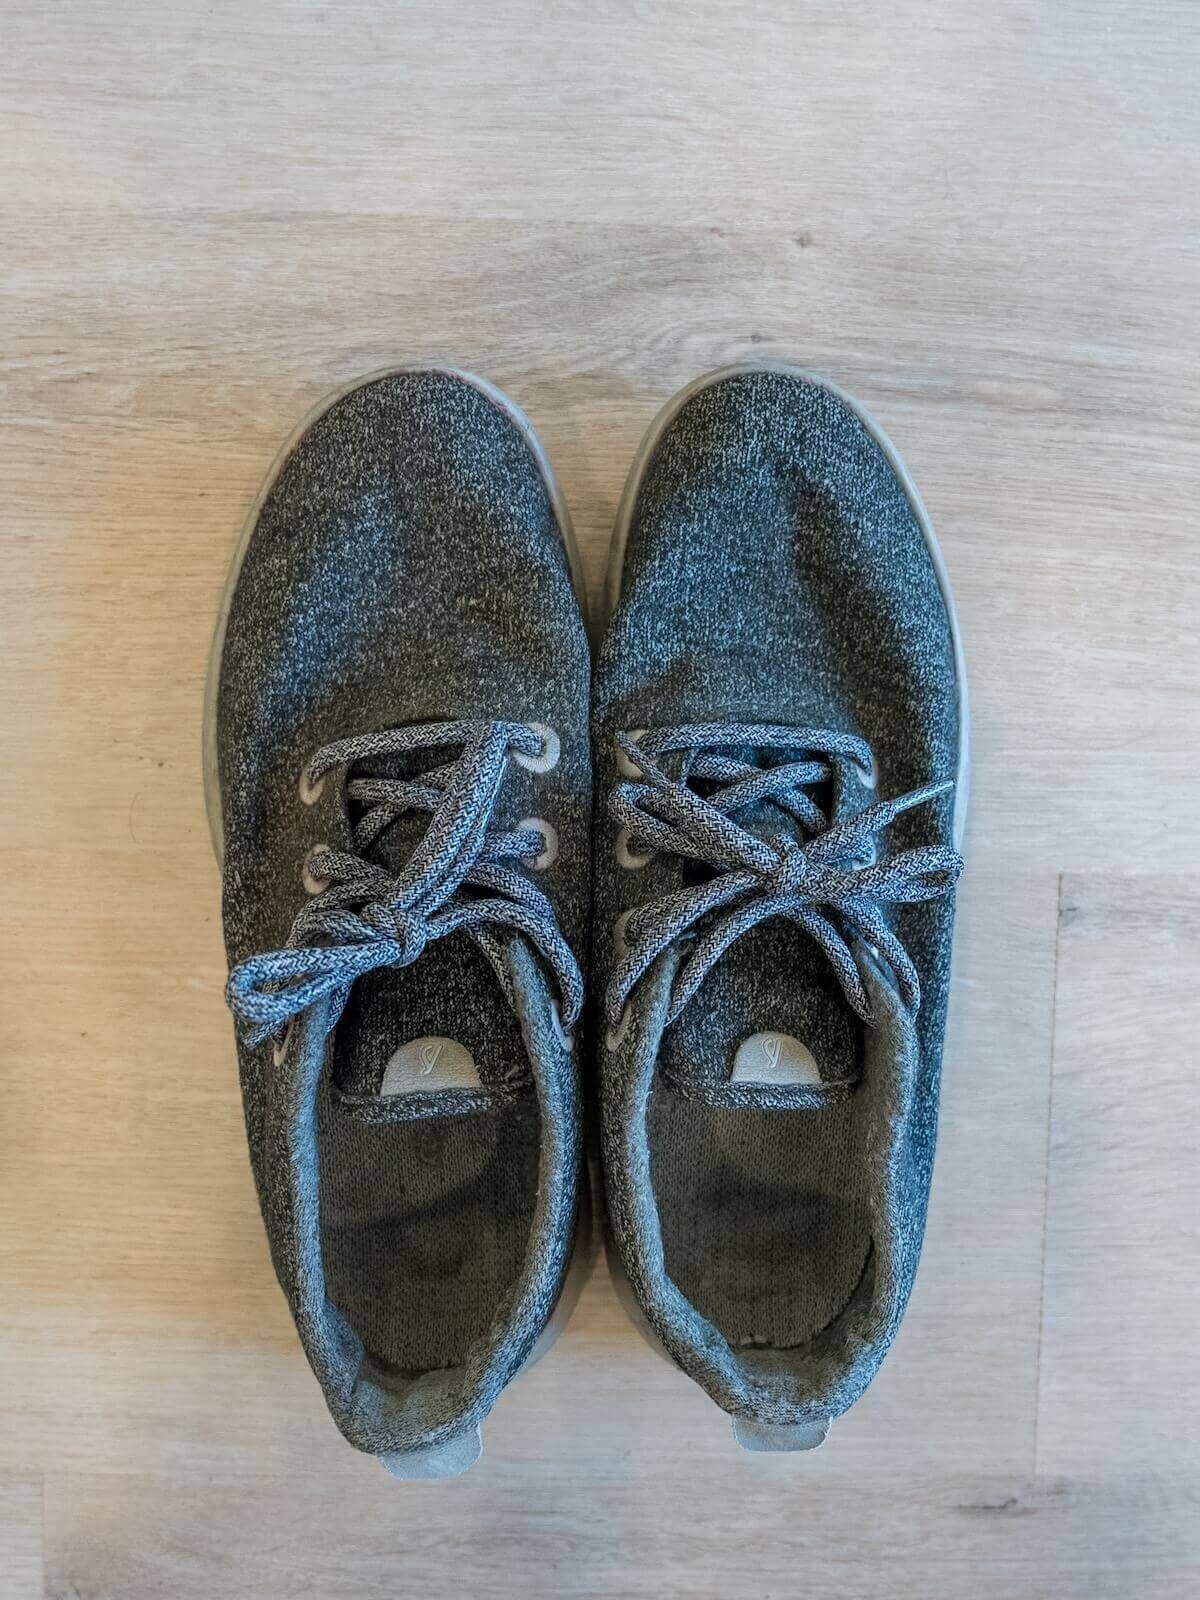 A pair of somewhat worn grey sneakers seen from above, sitting on a light hardwood floor.